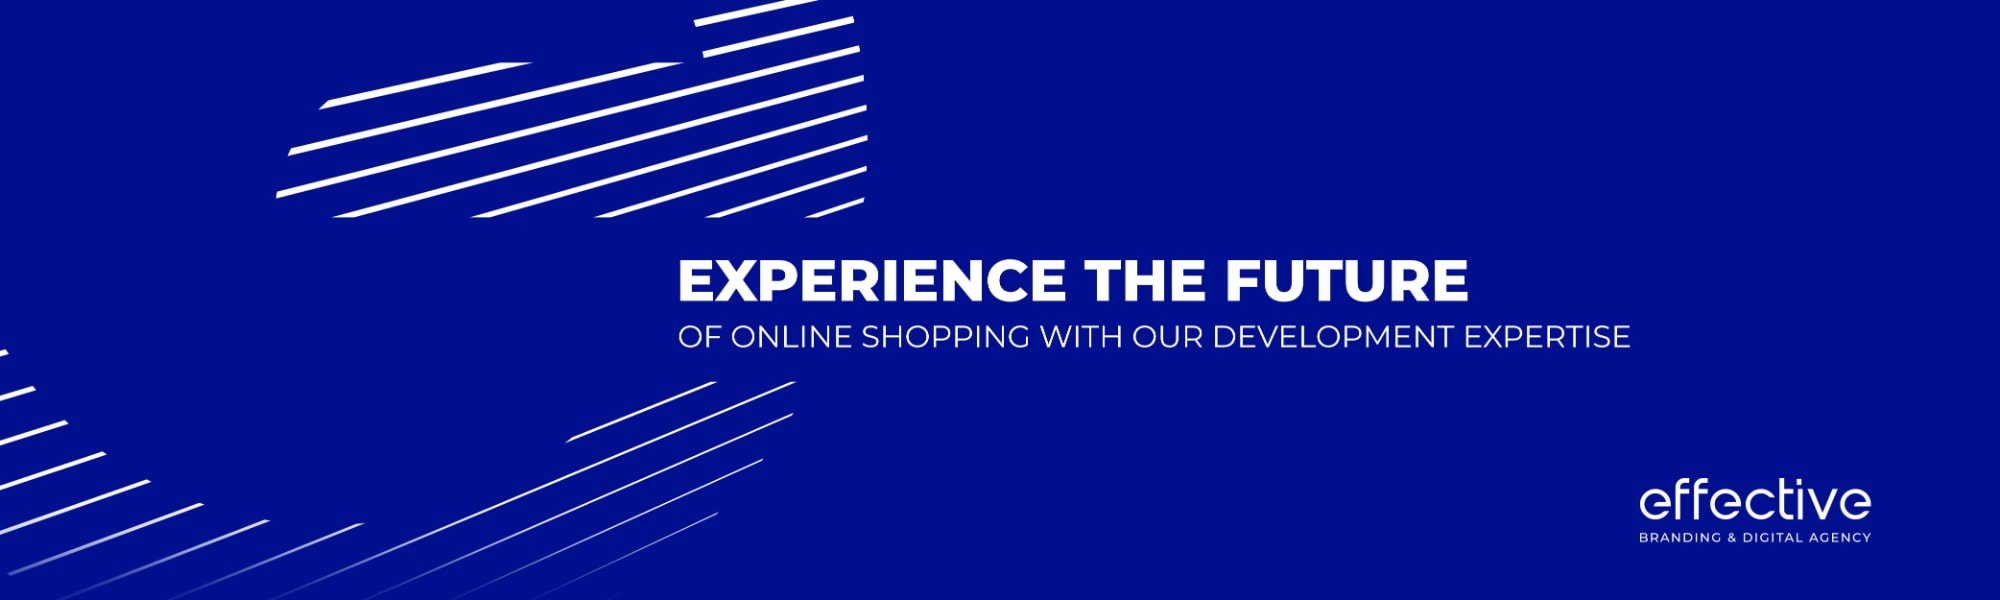 Experience the Future of Online Shopping with Our Development Expertise